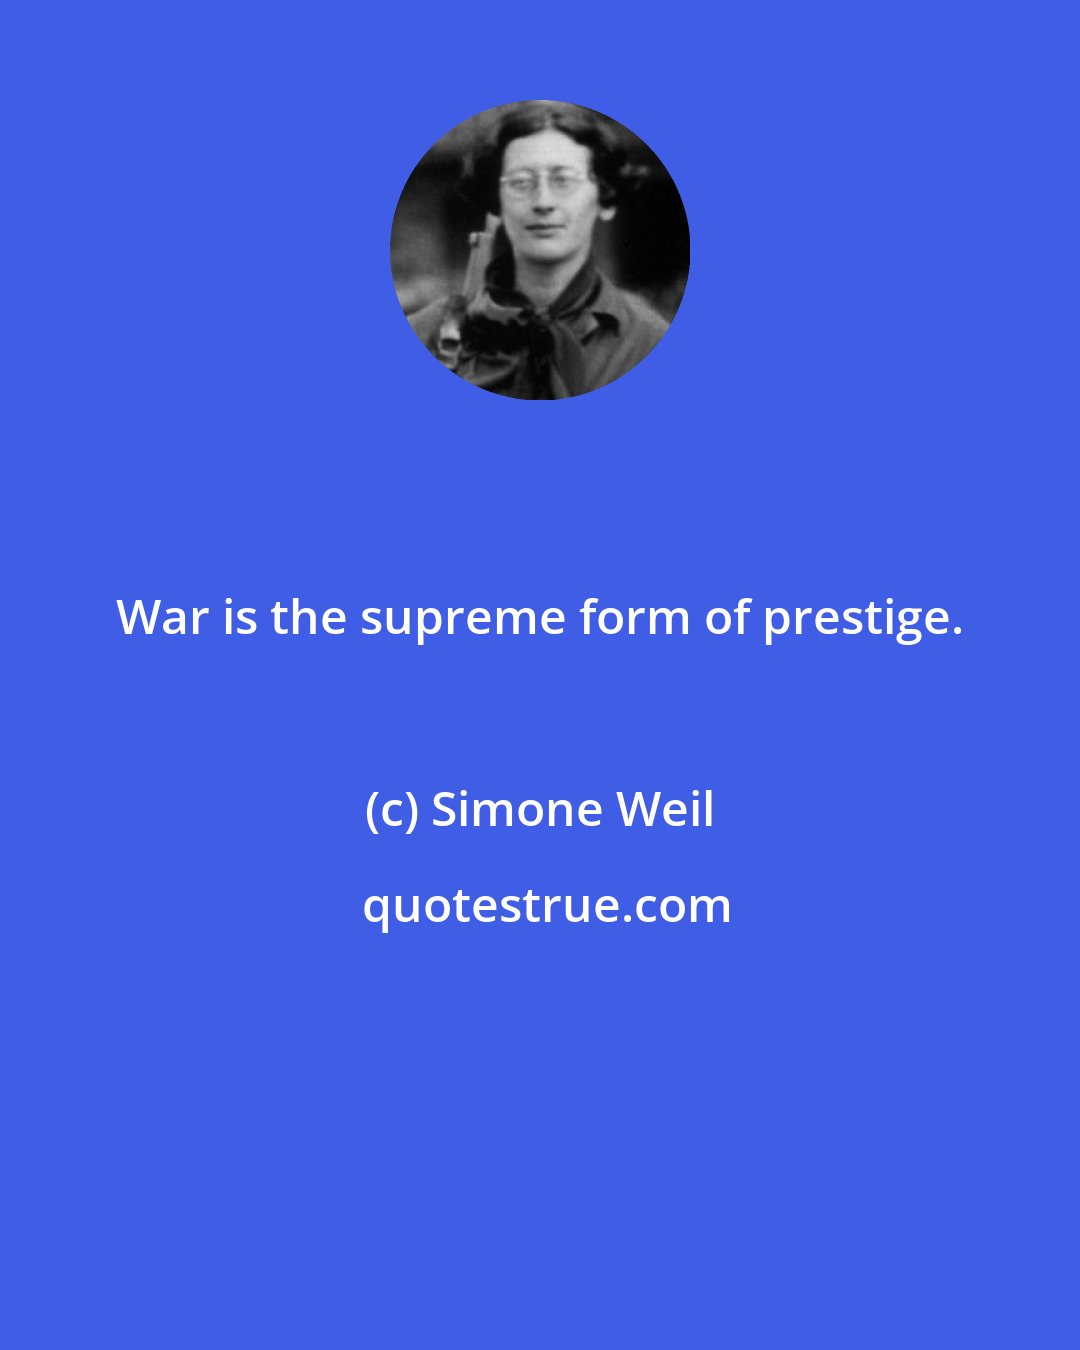 Simone Weil: War is the supreme form of prestige.